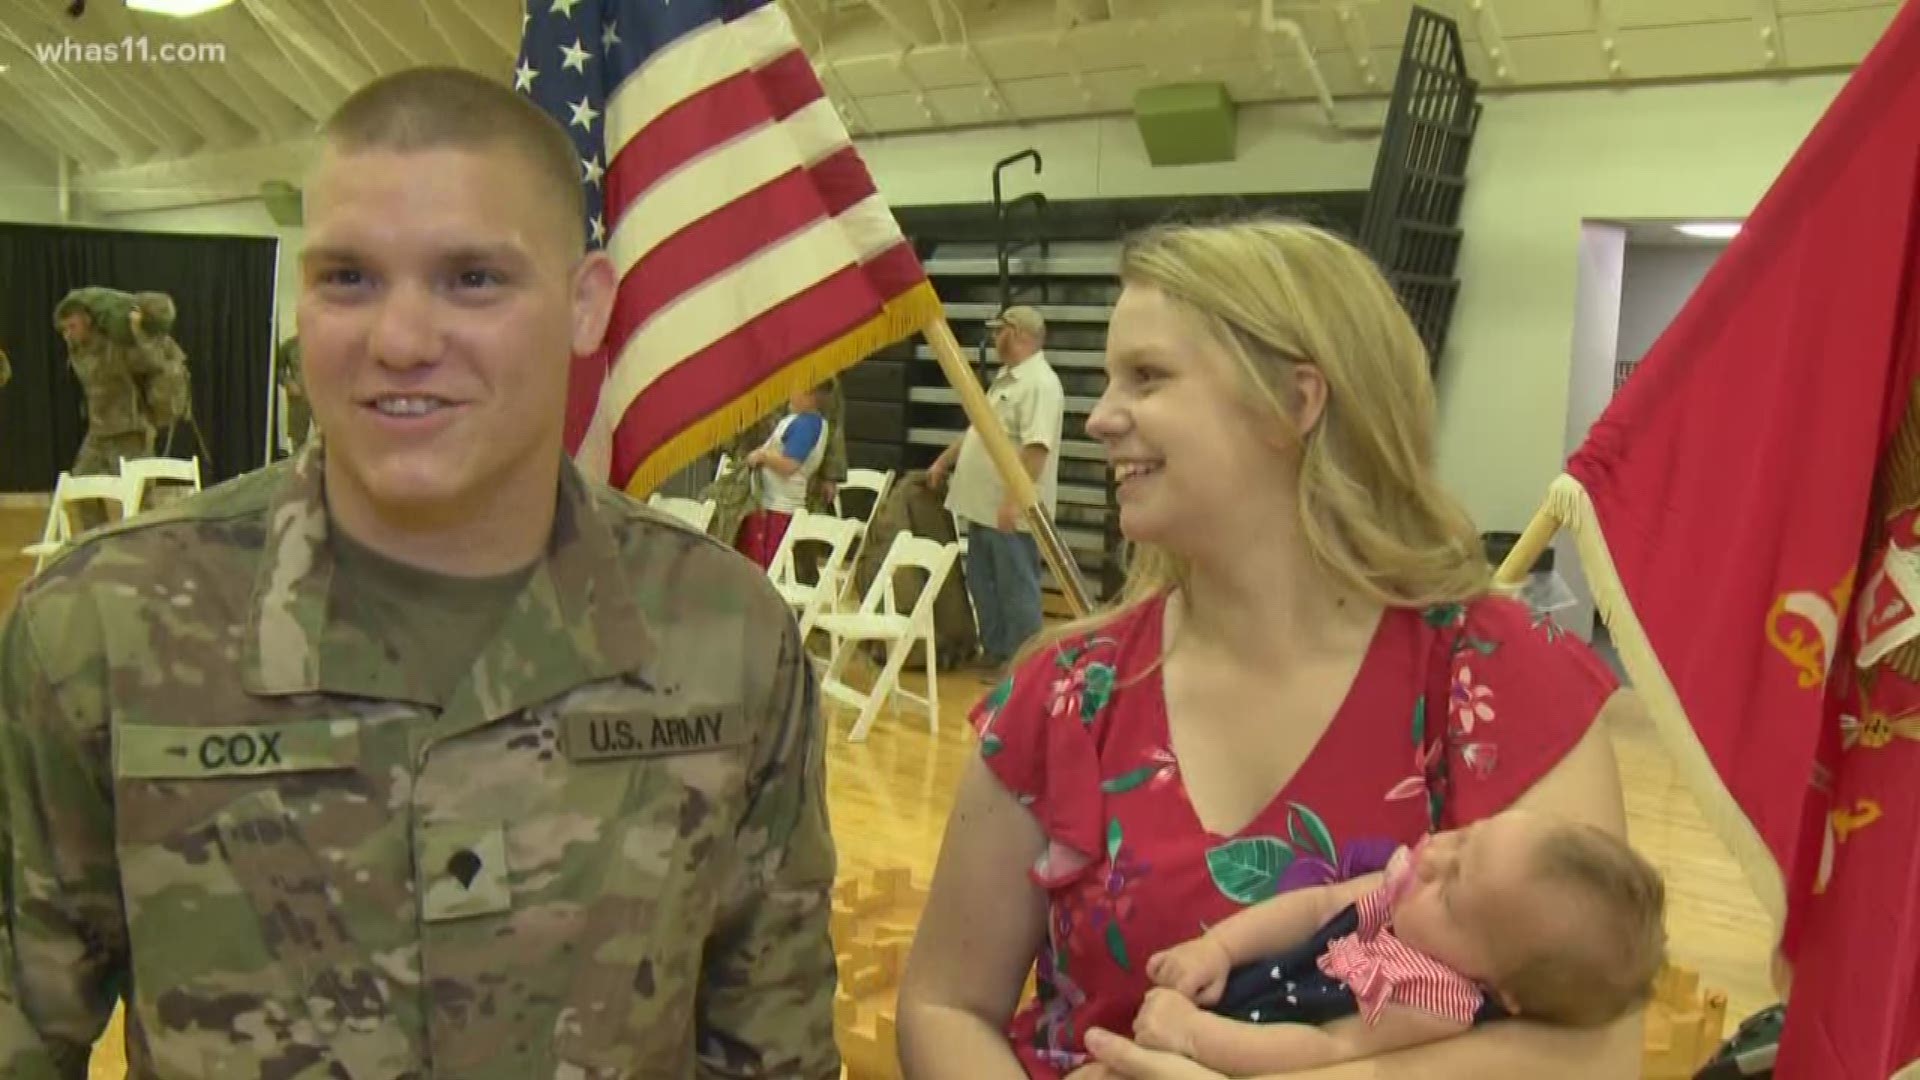 After 9 months deployed in Afghanistan, The 19th Engineer Battalion's 42nd Clearance Company is finally home.